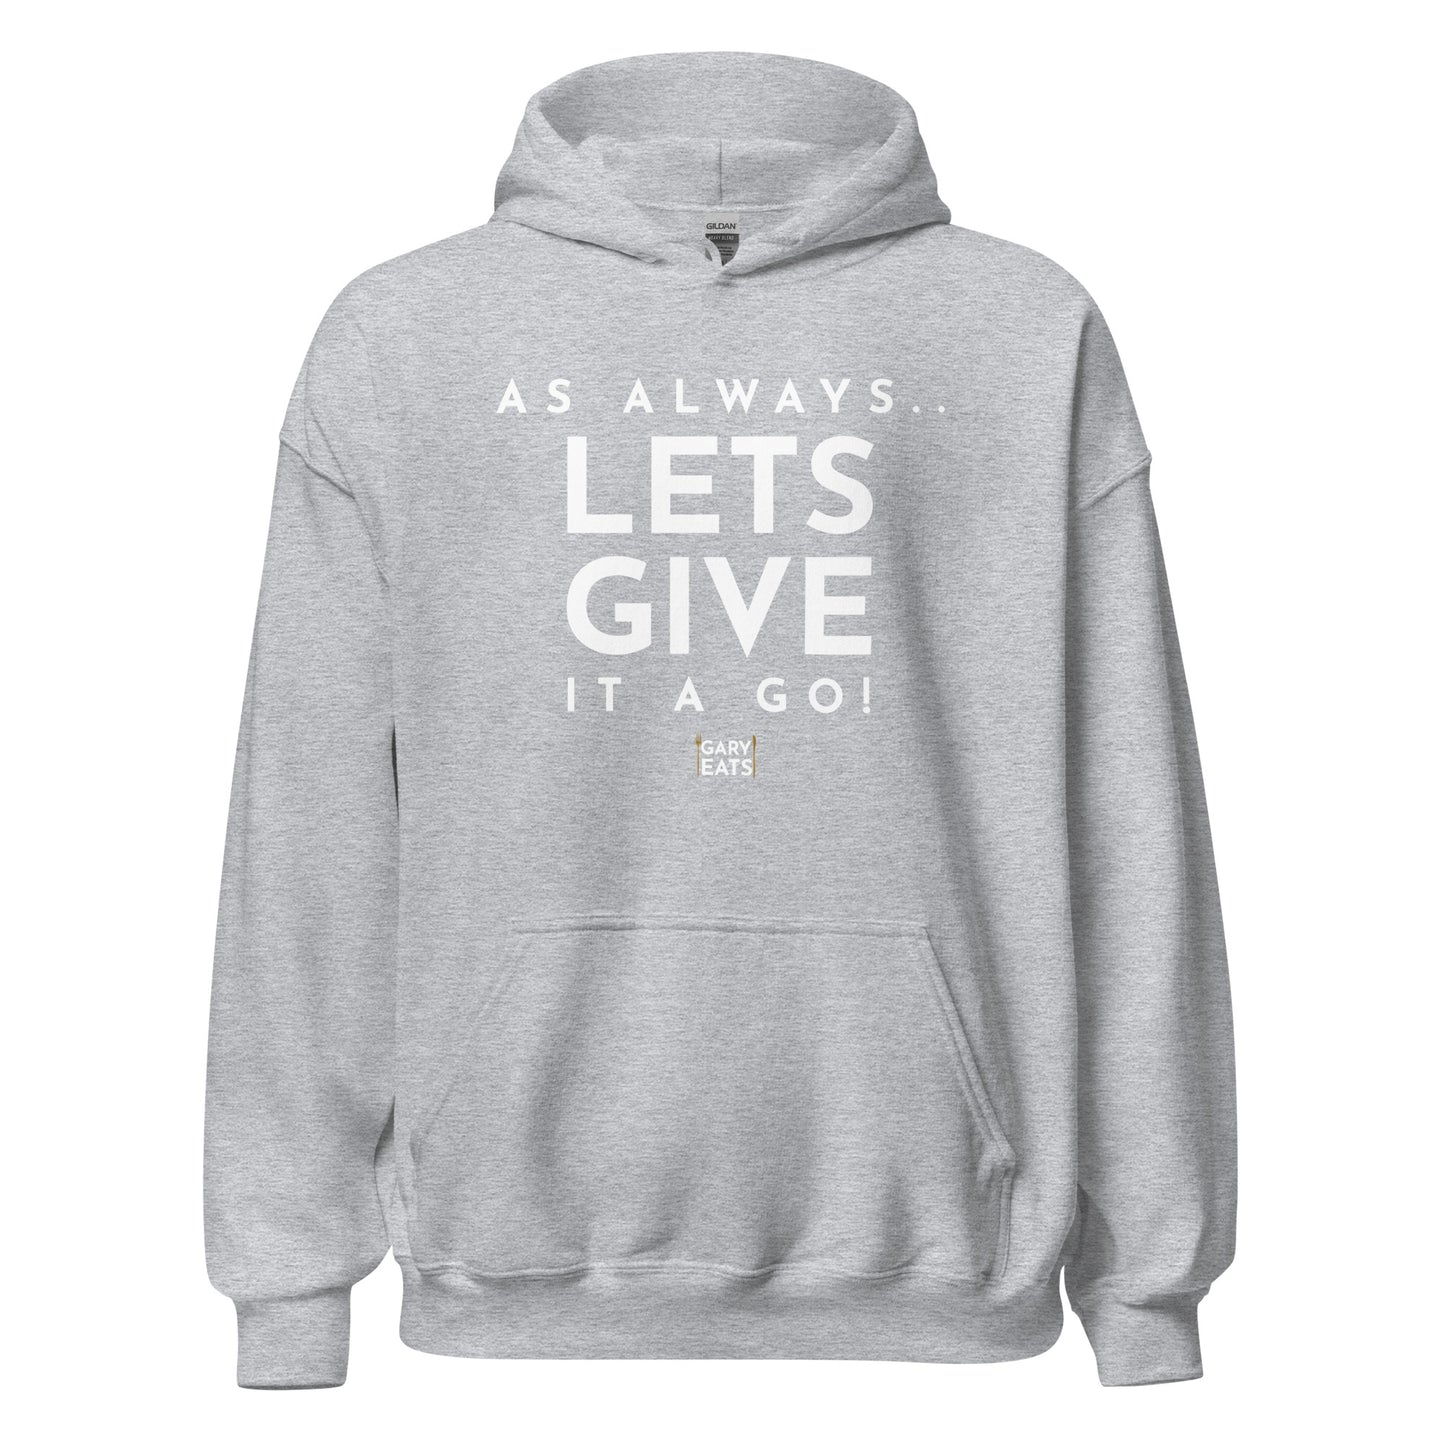 Gary Eats Let's give it a go! Unisex Hoodie